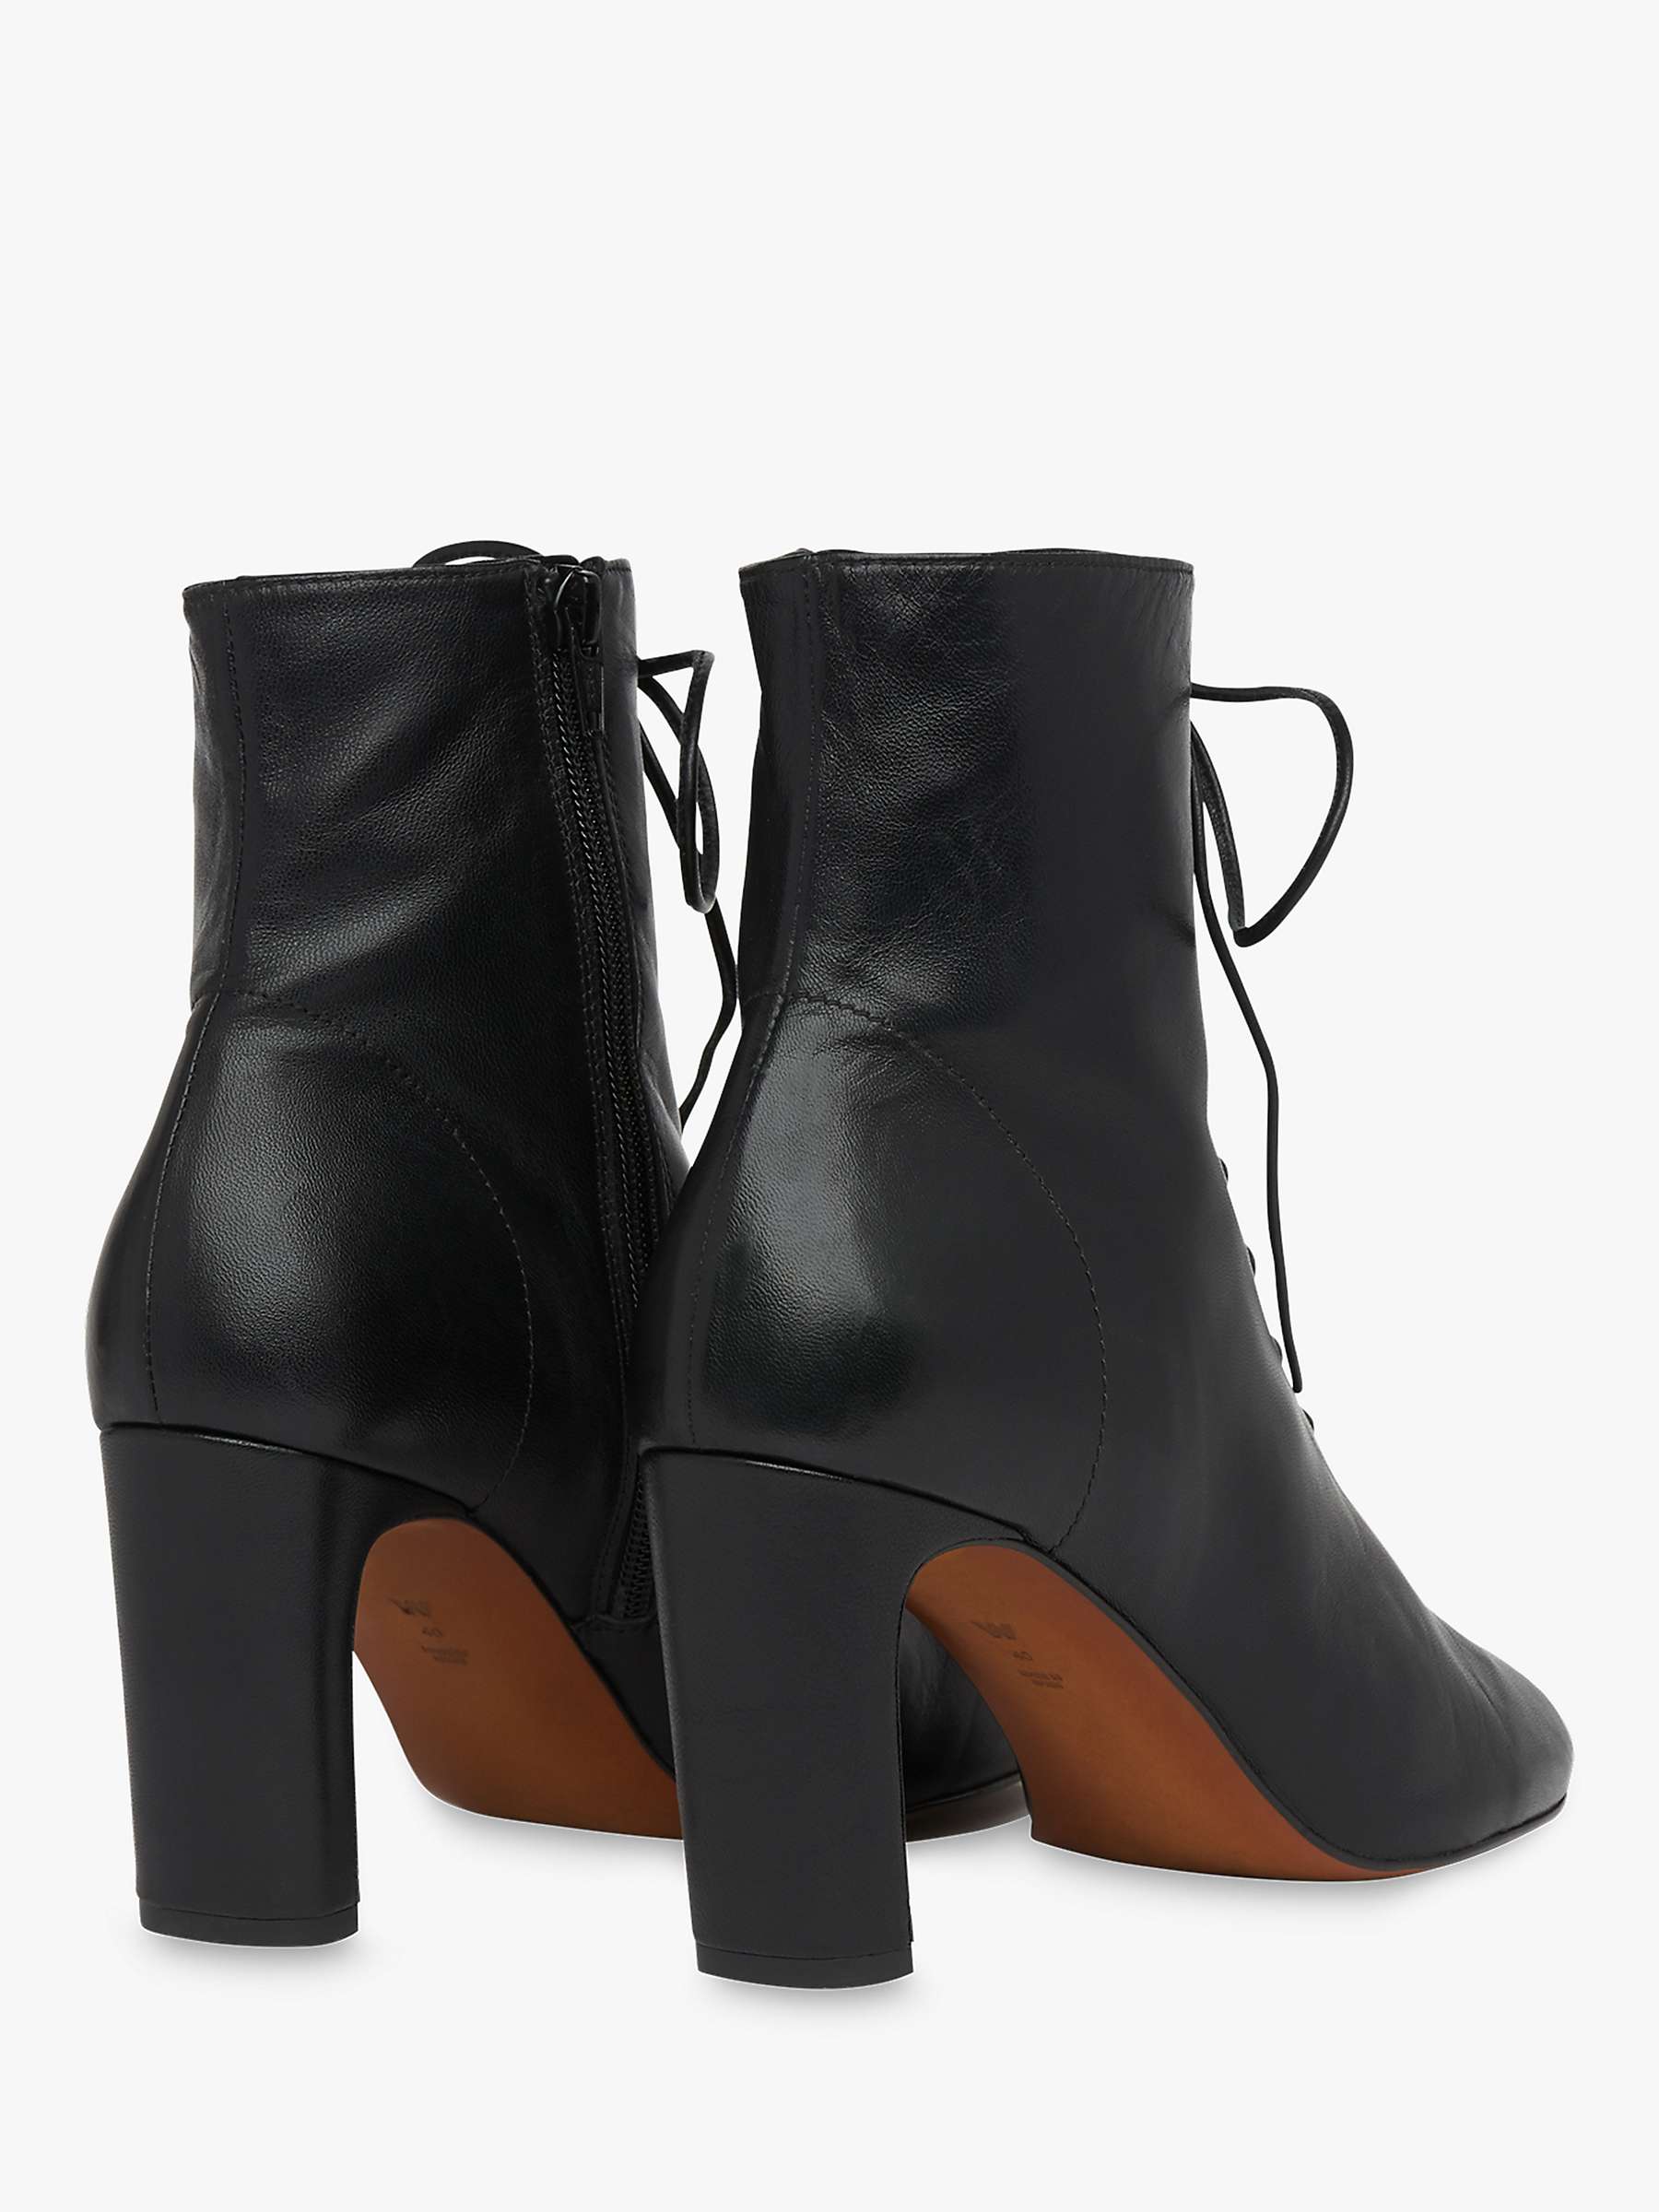 Buy Whistles Dahlia Leather Lace Up Ankle Boots Online at johnlewis.com